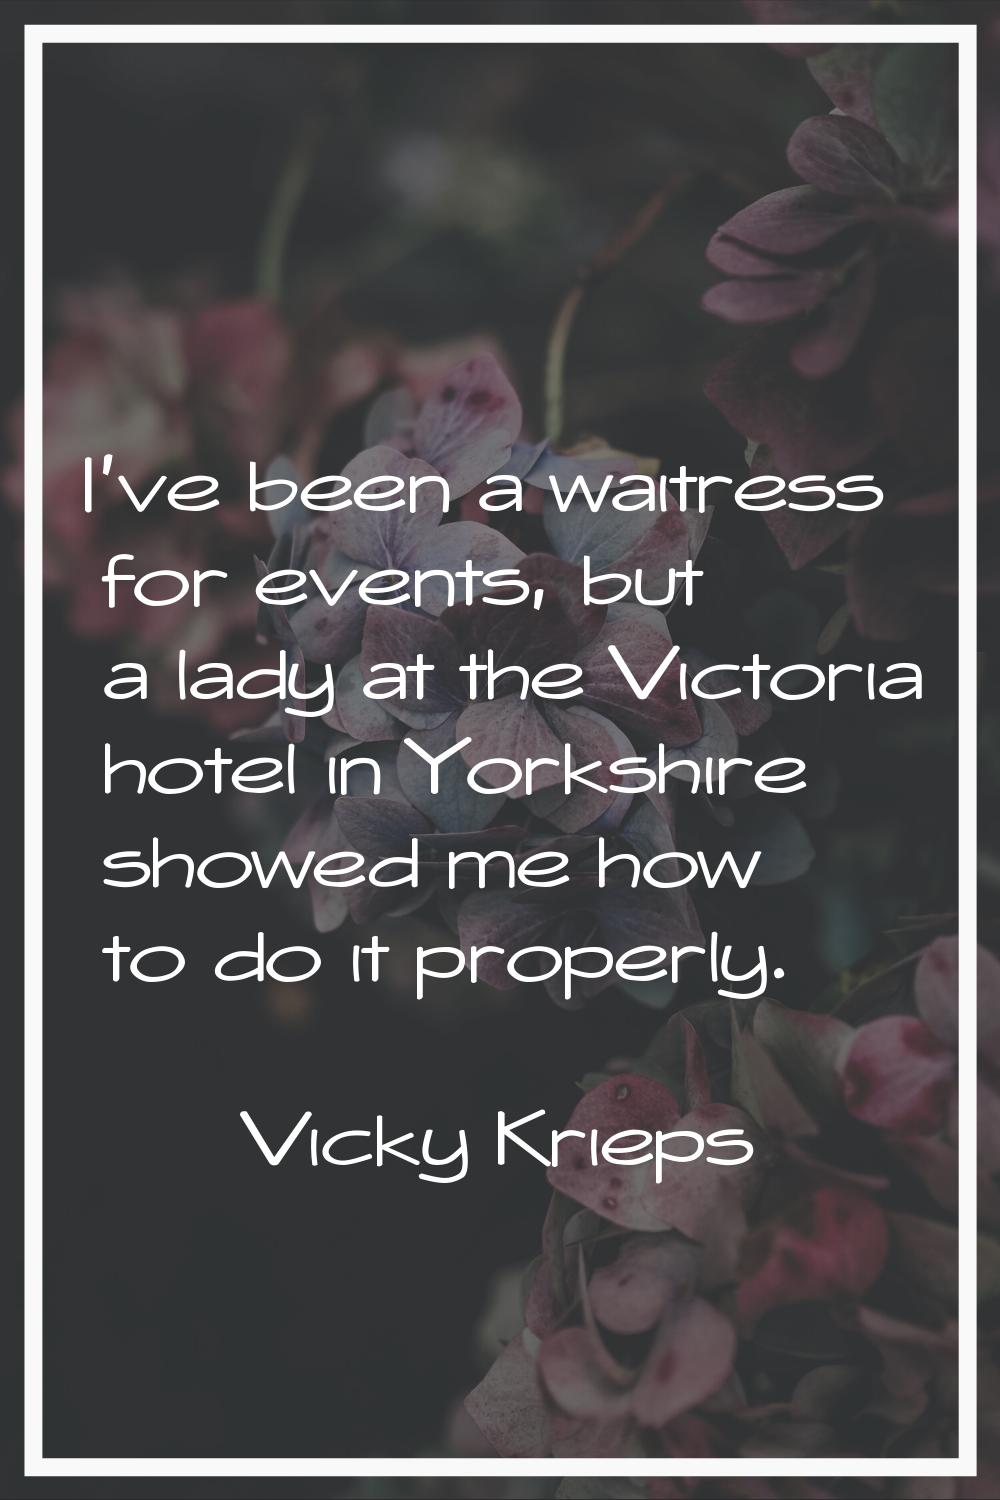 I've been a waitress for events, but a lady at the Victoria hotel in Yorkshire showed me how to do 